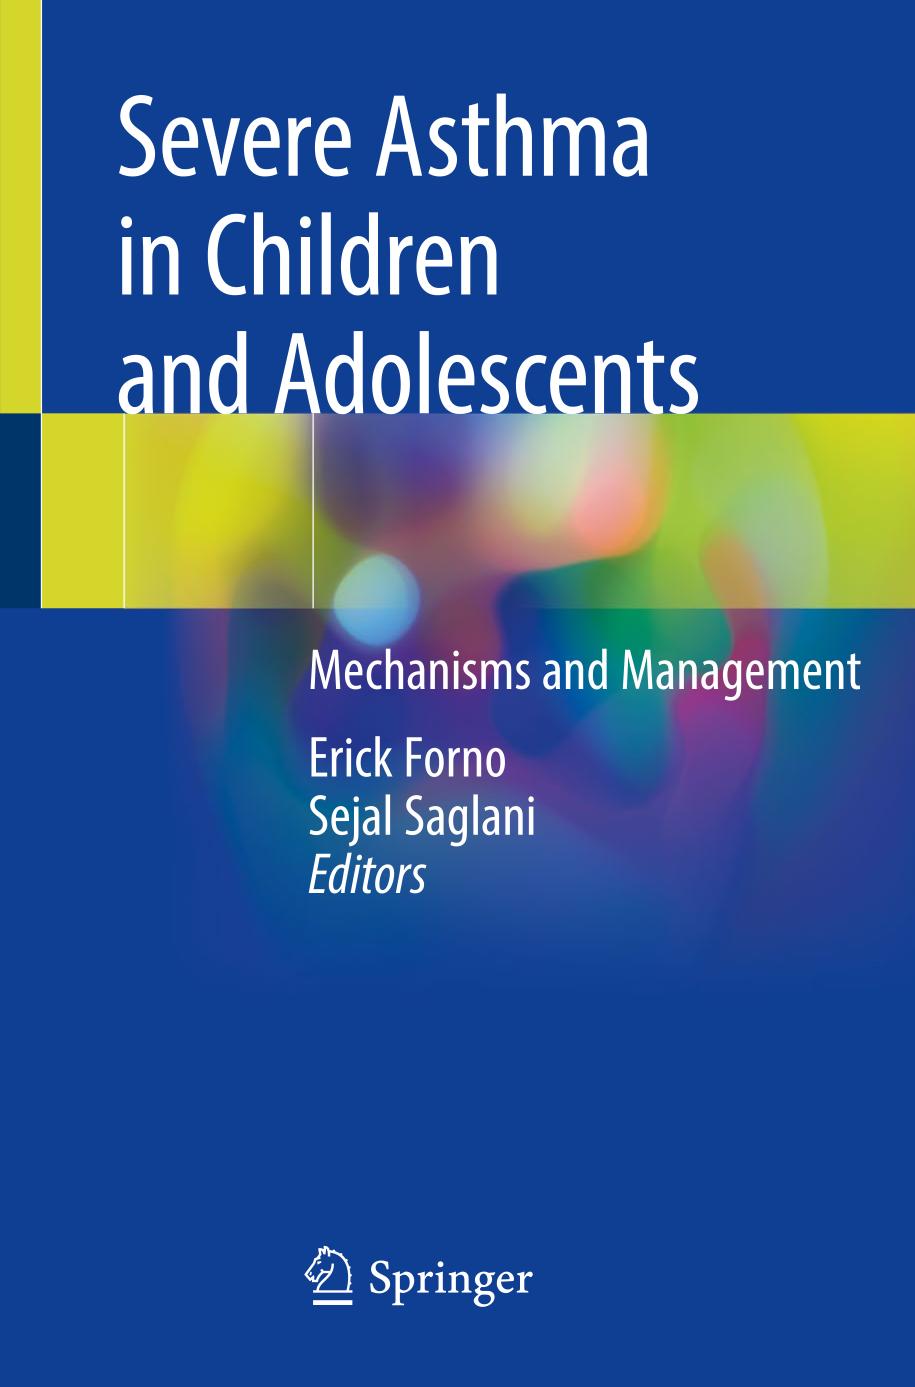 Severe asthma in children and adolescents : mechanisms and management